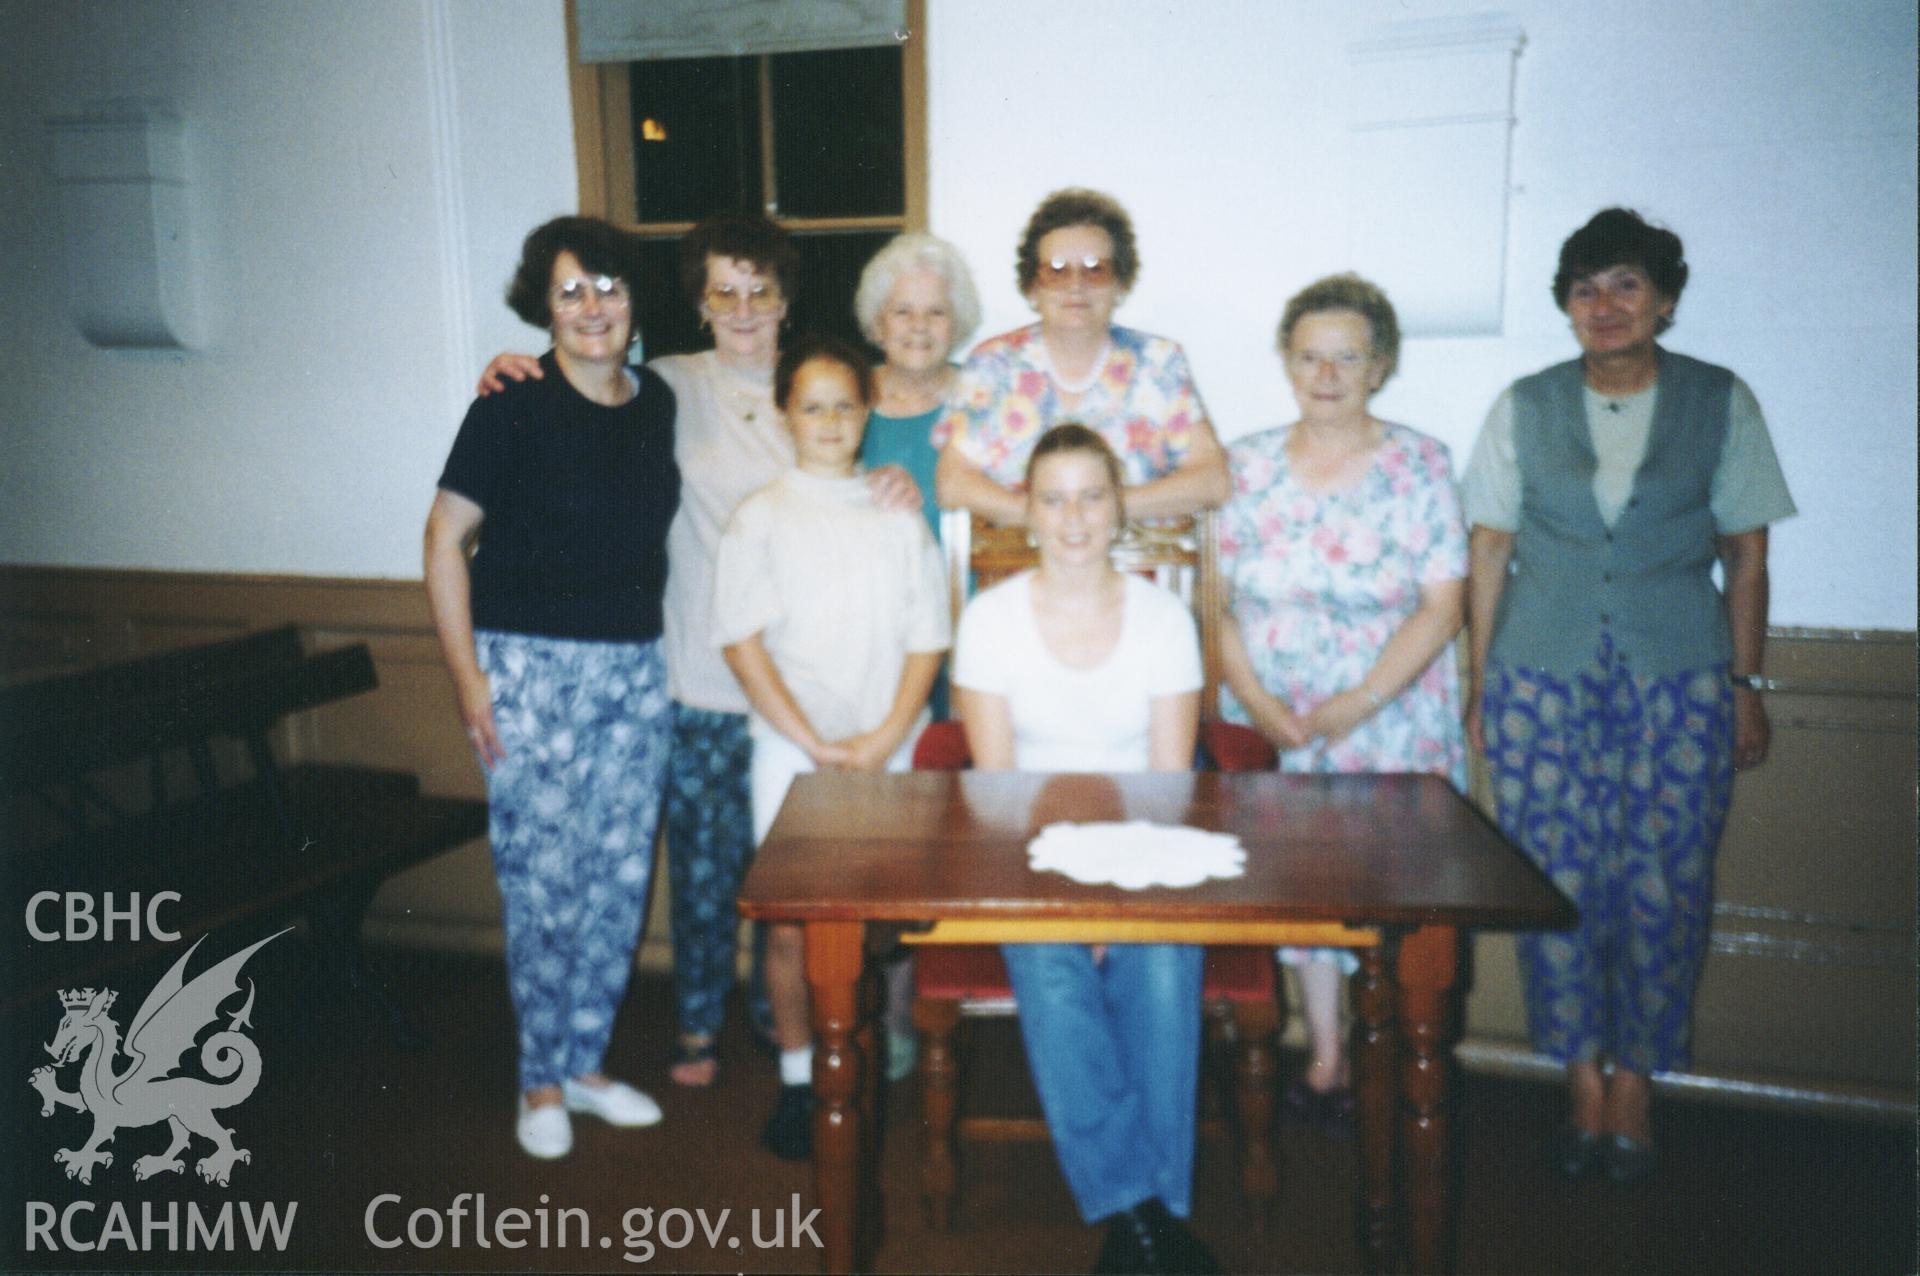 Colour photograph of the 'Wedding Team' tasked with cleaning the chapel before a wedding c. 1980s. At Peniel the wedding takes place in Sedd Fawr. Donated as part of the Digital Dissent Project.